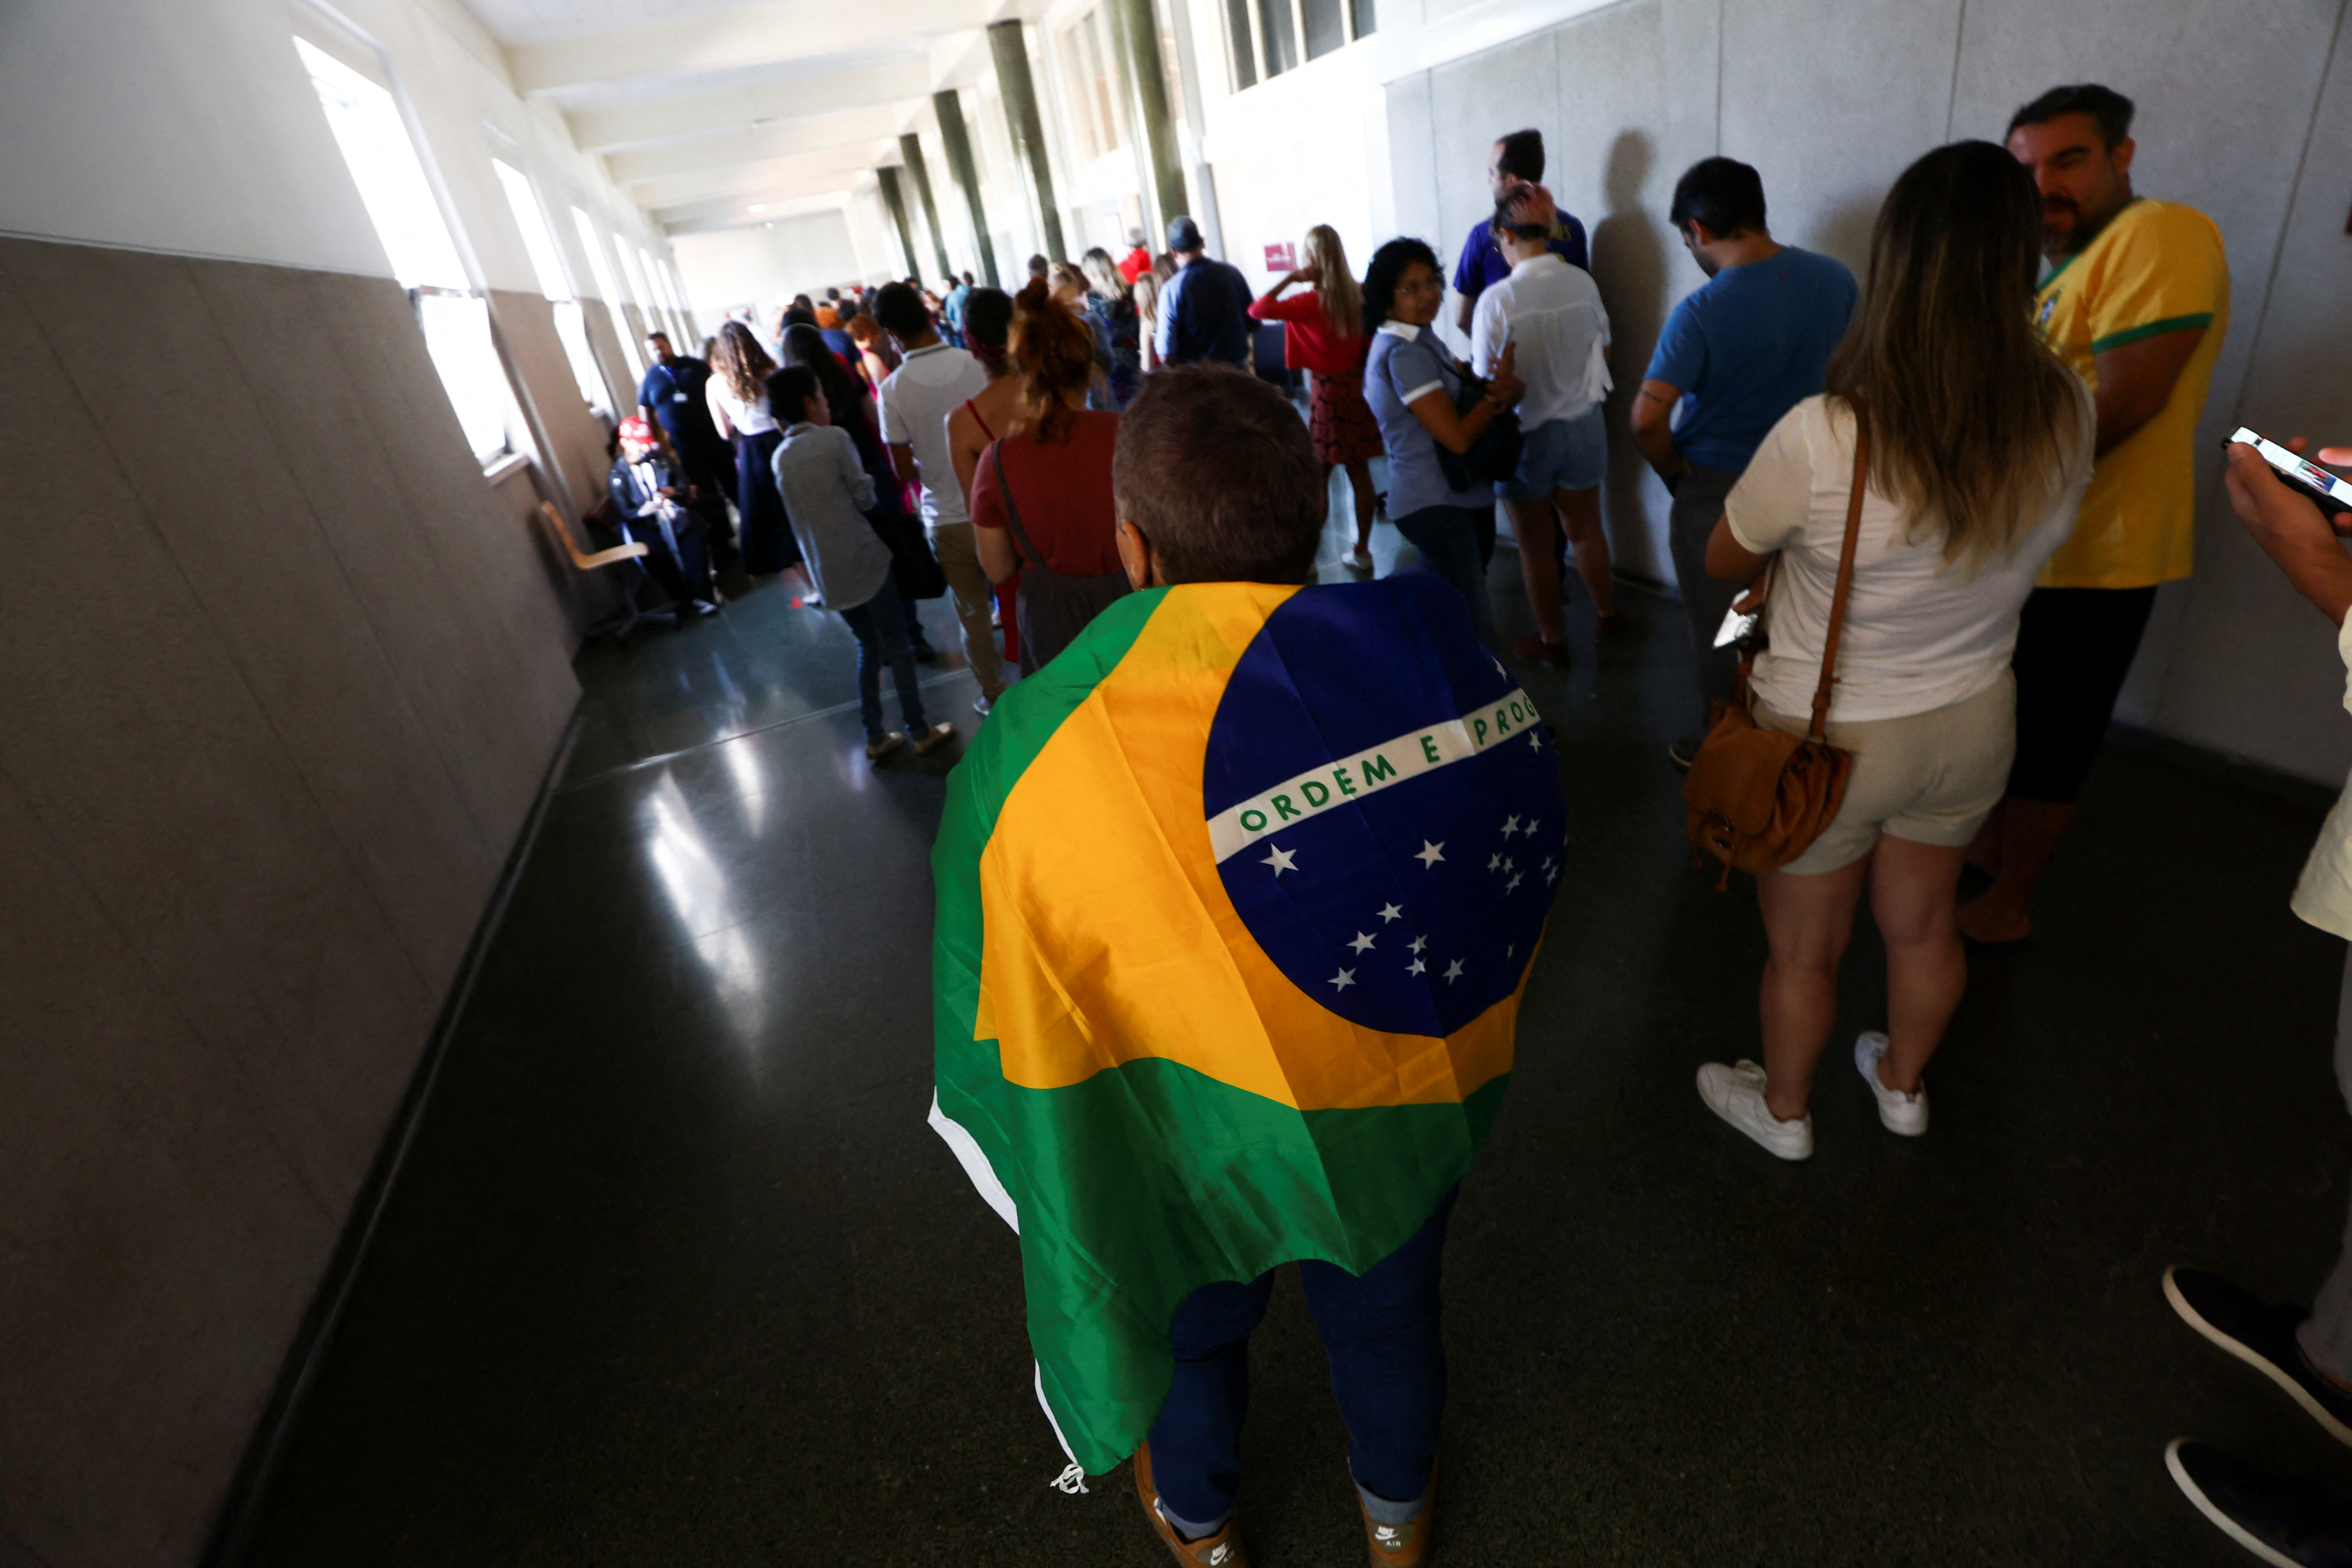 Citizens of Brazil wait in line to cast their vote in their country's election, in Lisbon